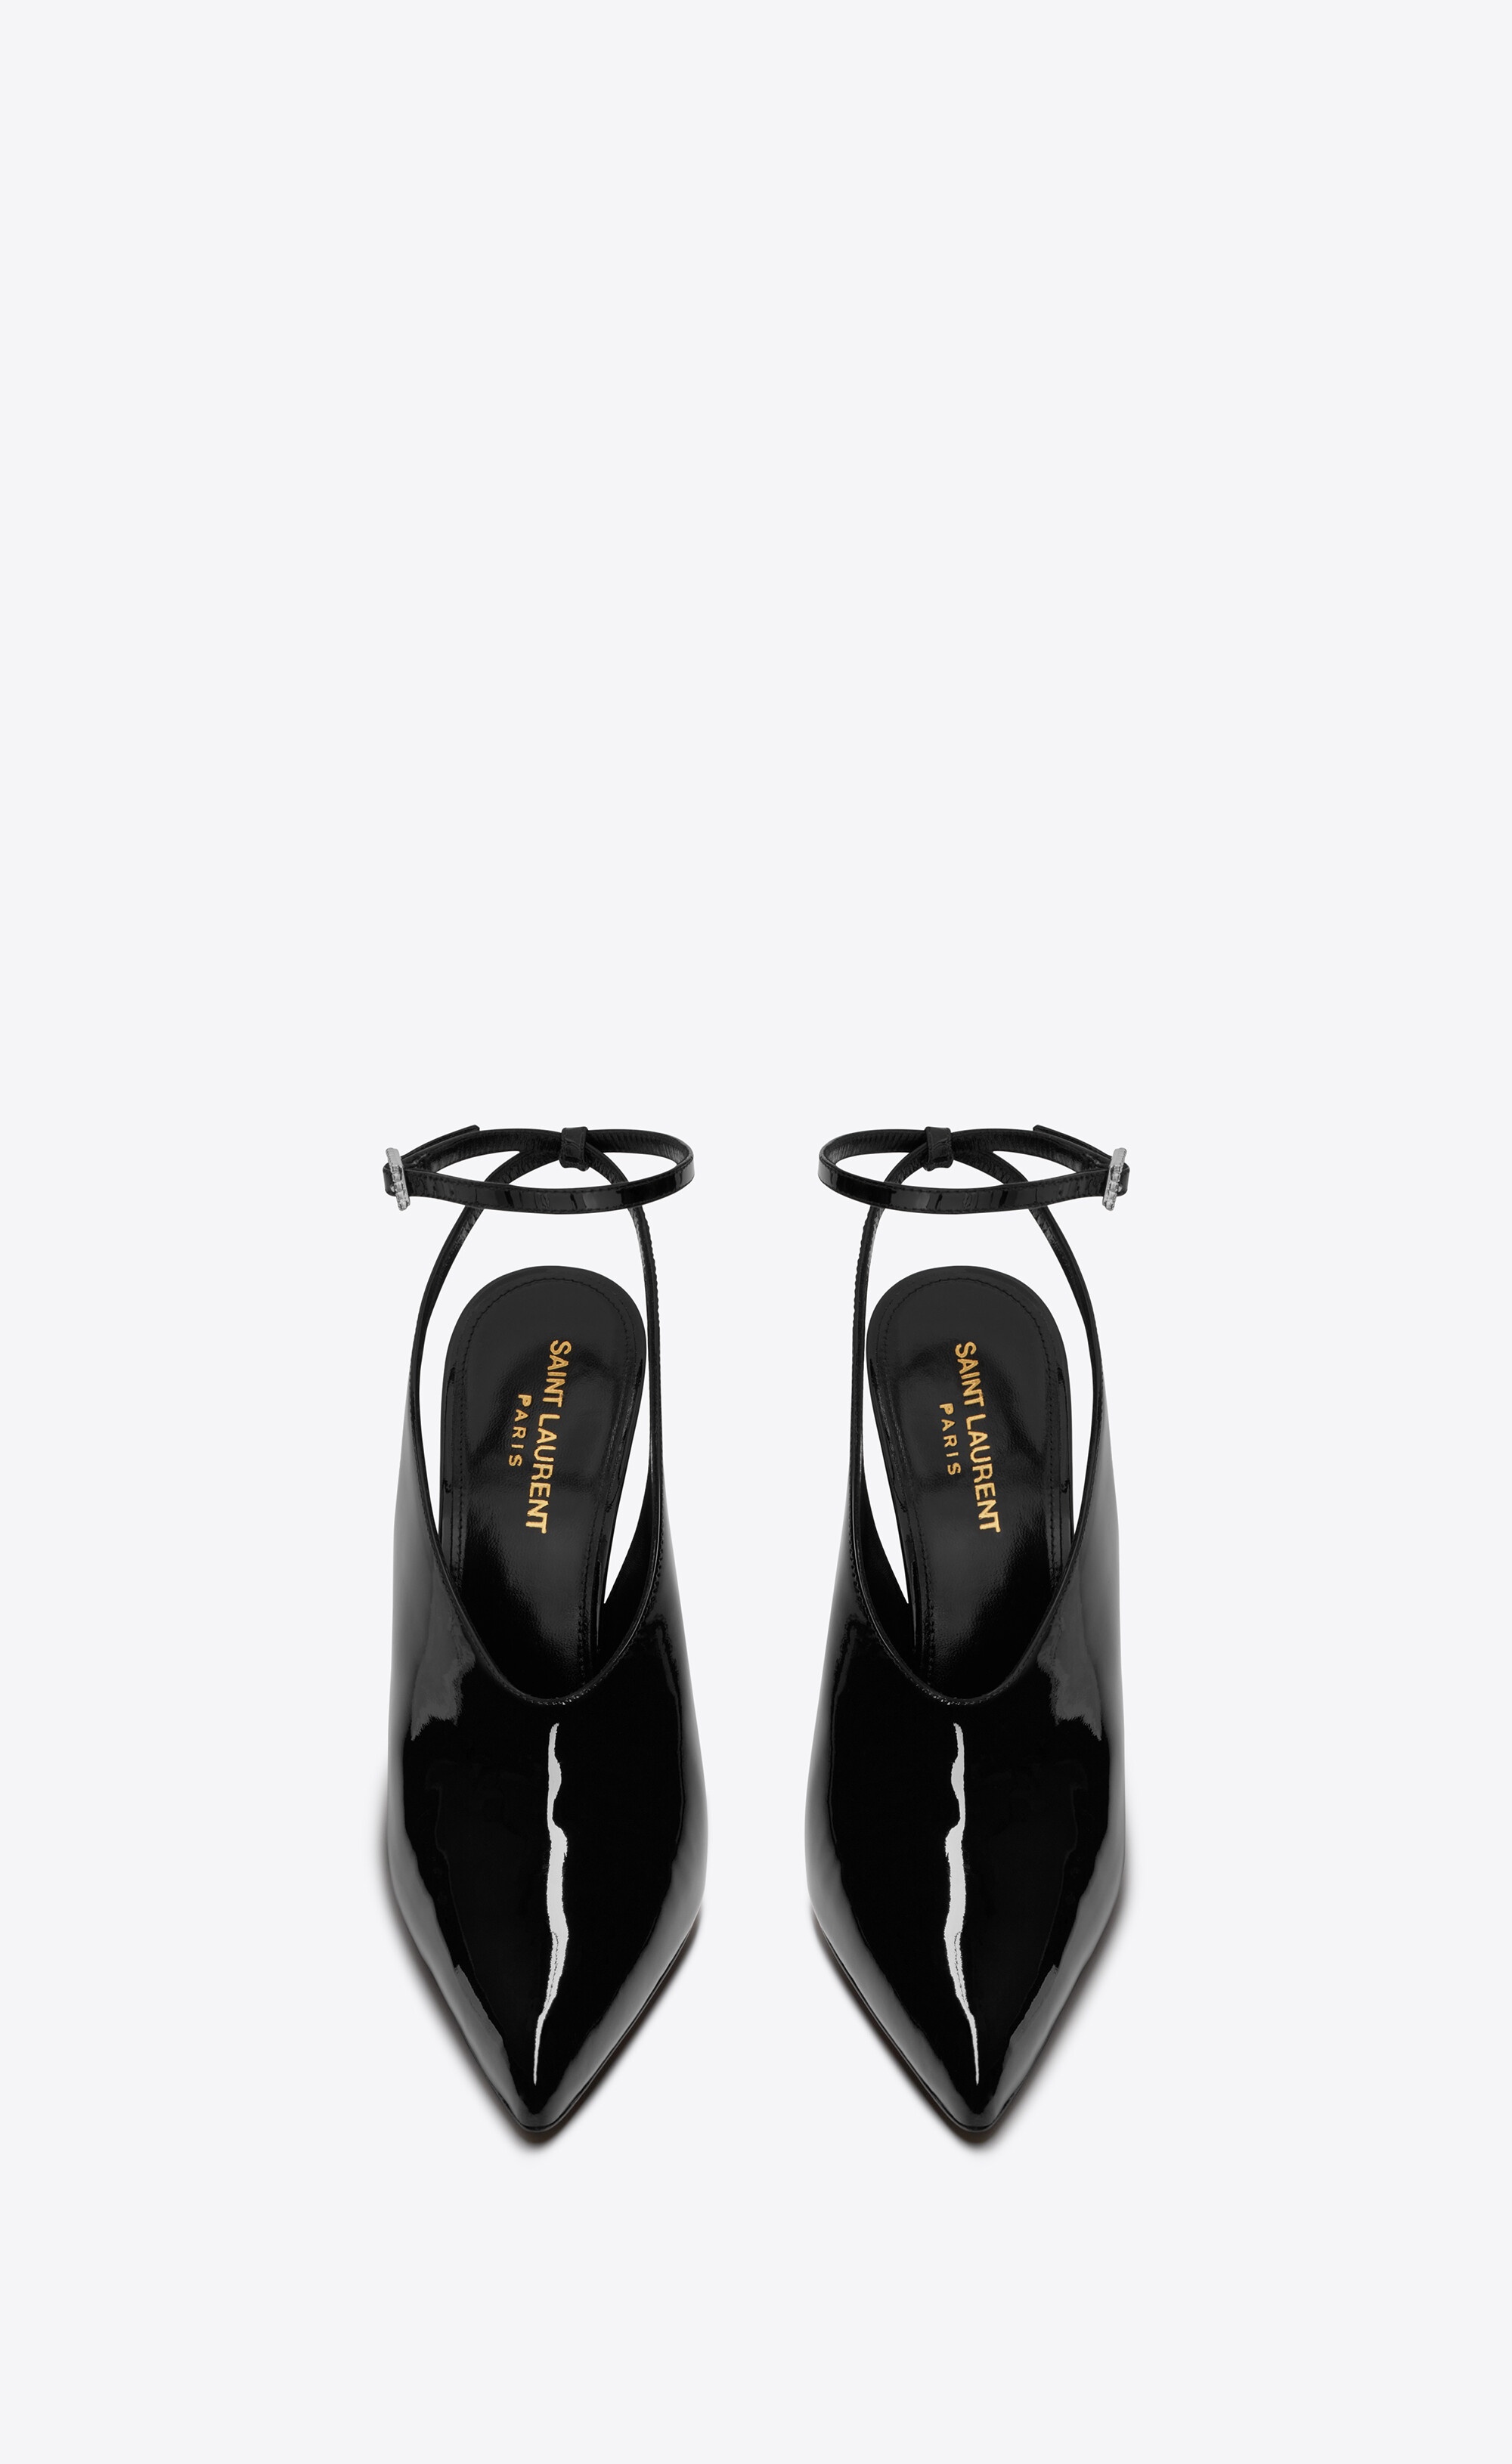 pulp slingback pumps in patent leather - 2